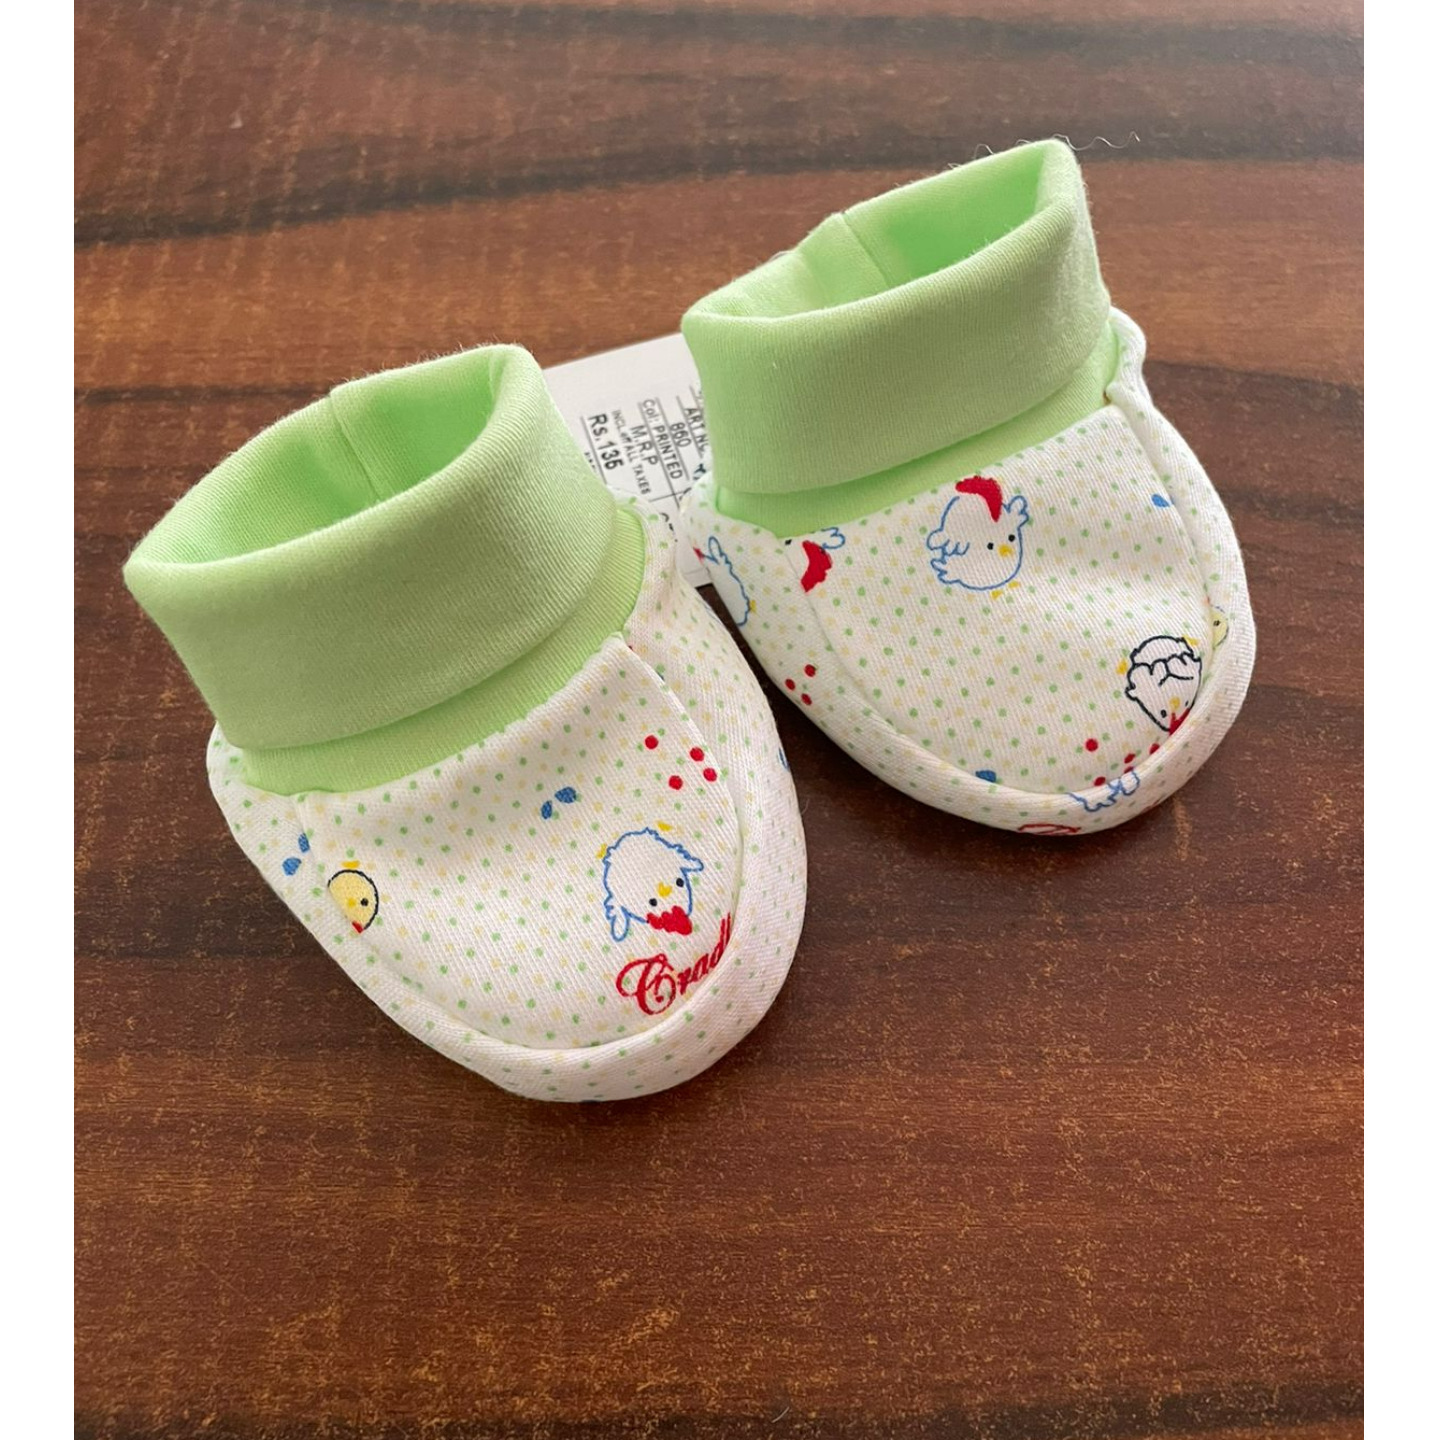 Cradle Togs Booties Rs 125 Only For New Born Babies